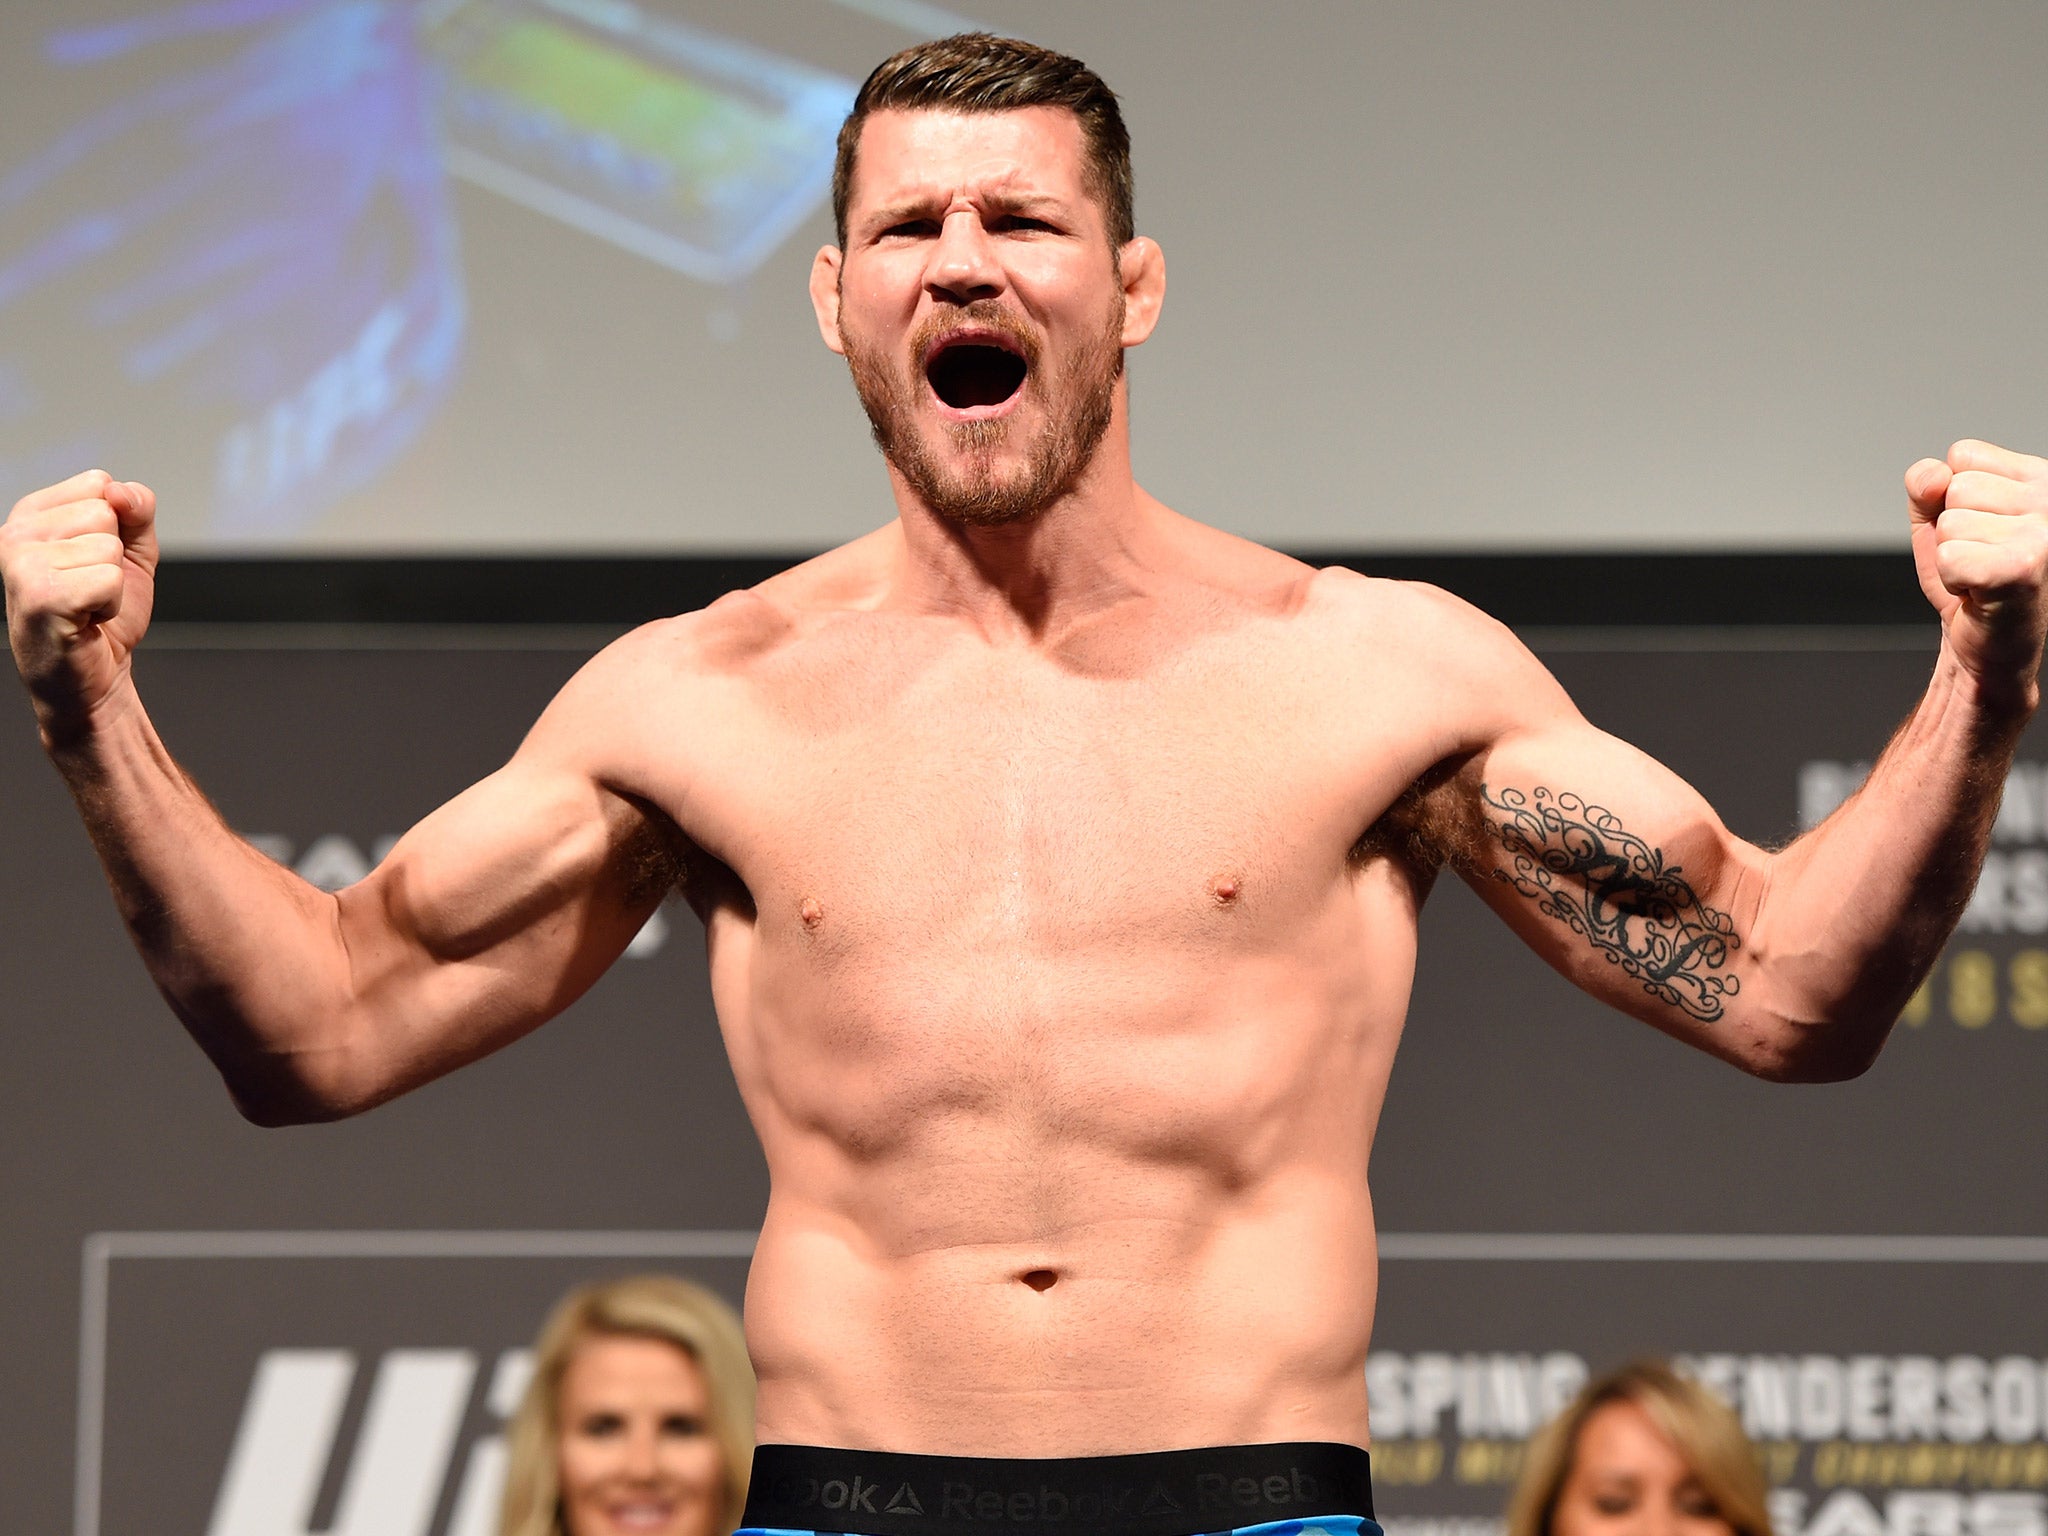 Michael Bisping weighs in ahead of his UFC 204 fight with Dan Henderson